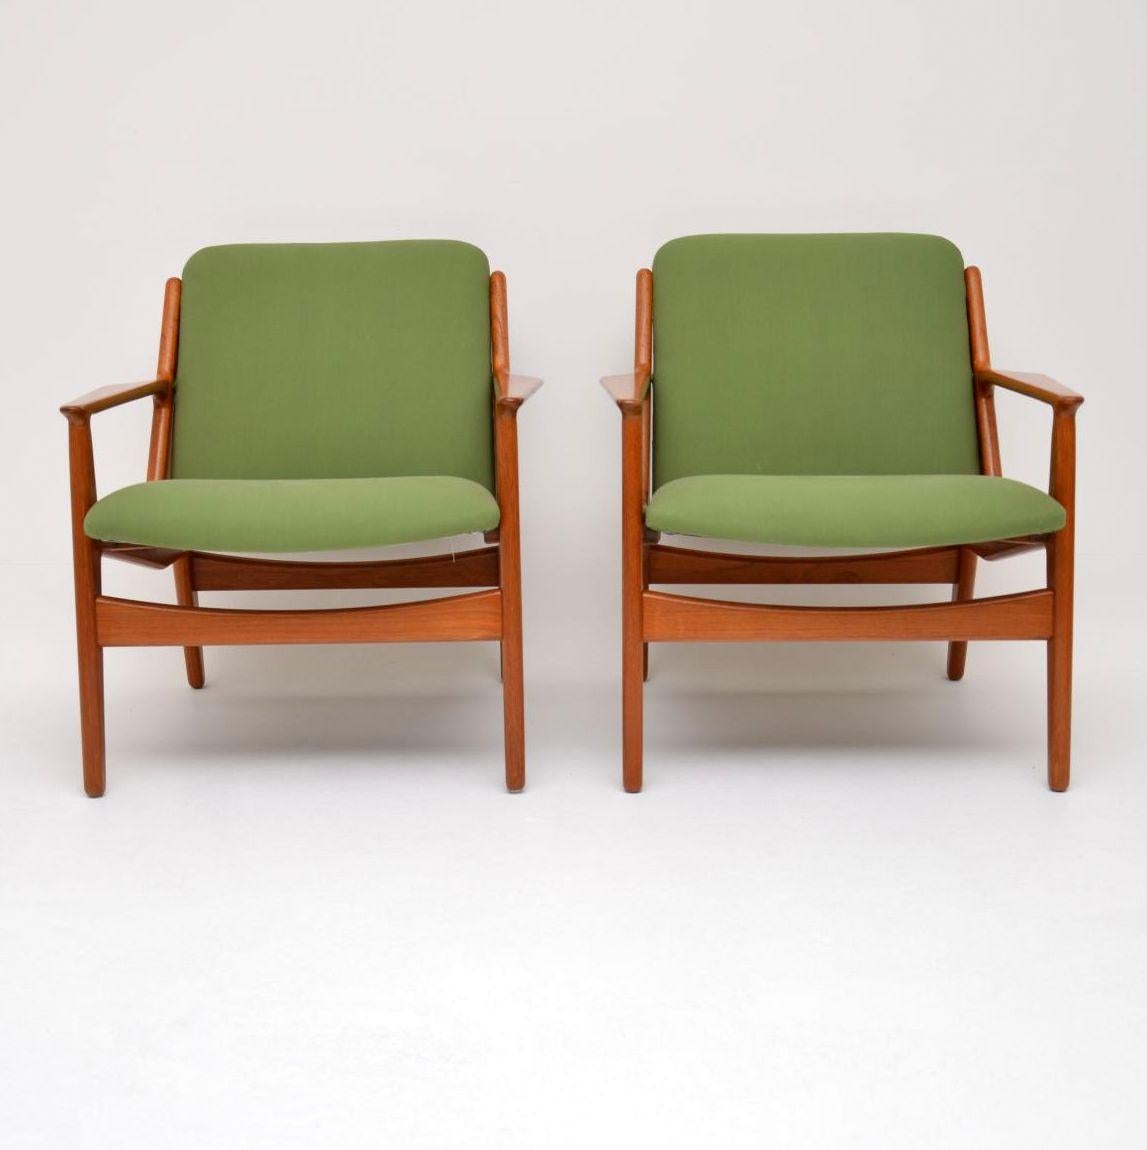 An absolutely stunning and extremely rare pair of vintage Danish armchairs in solid teak, these were designed by Arne Vodder and were made by Vamo in the 1950s-1960s. We have had the frames fully stripped and re-polished to a very high standard,